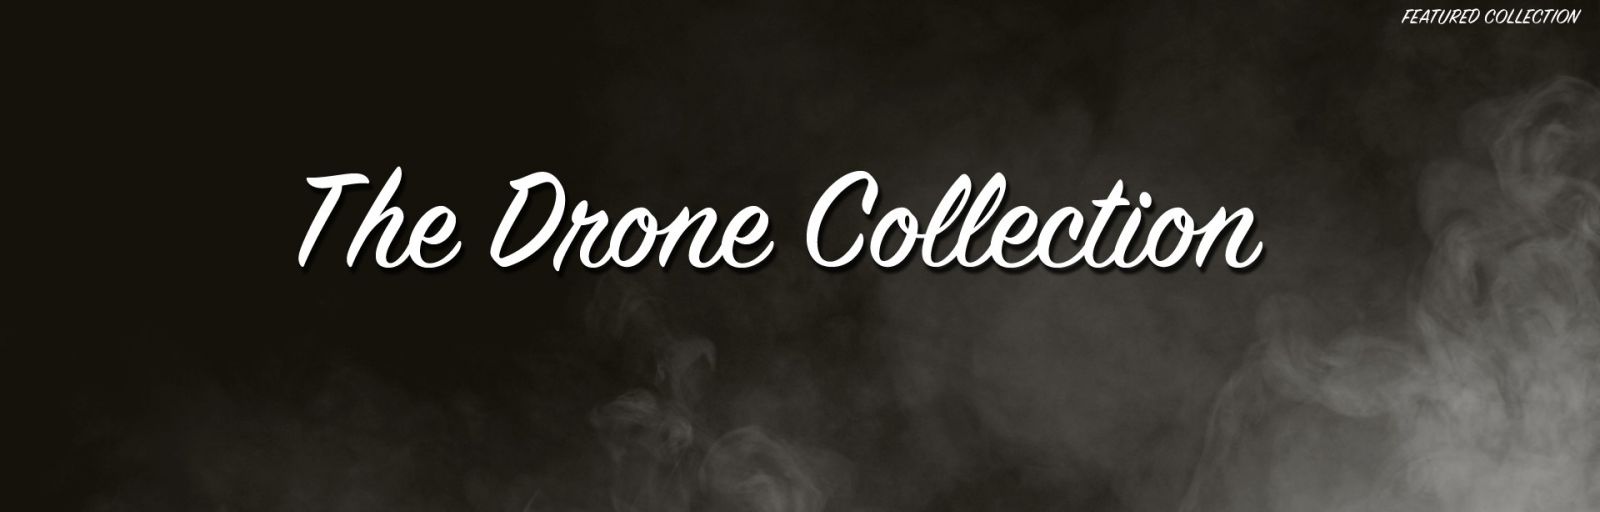 The Drone Collection